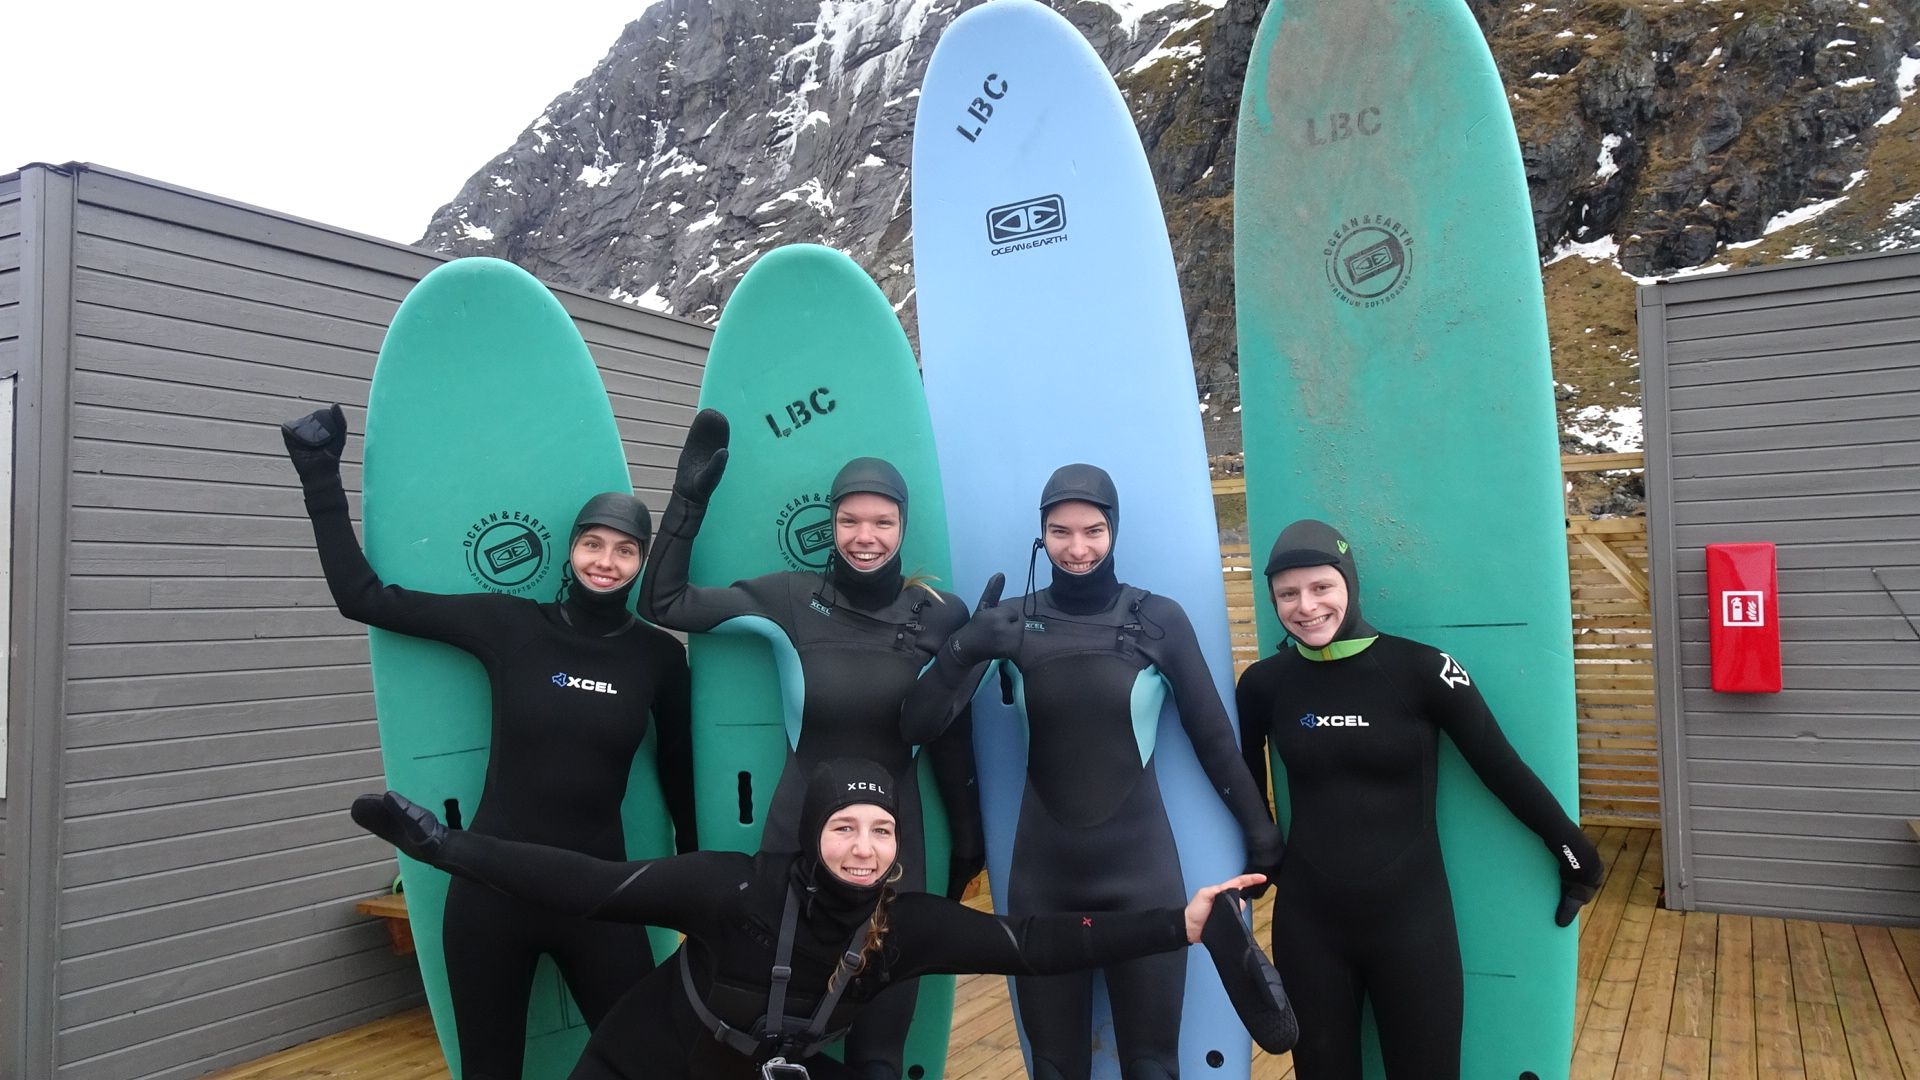 The Arctic surfers